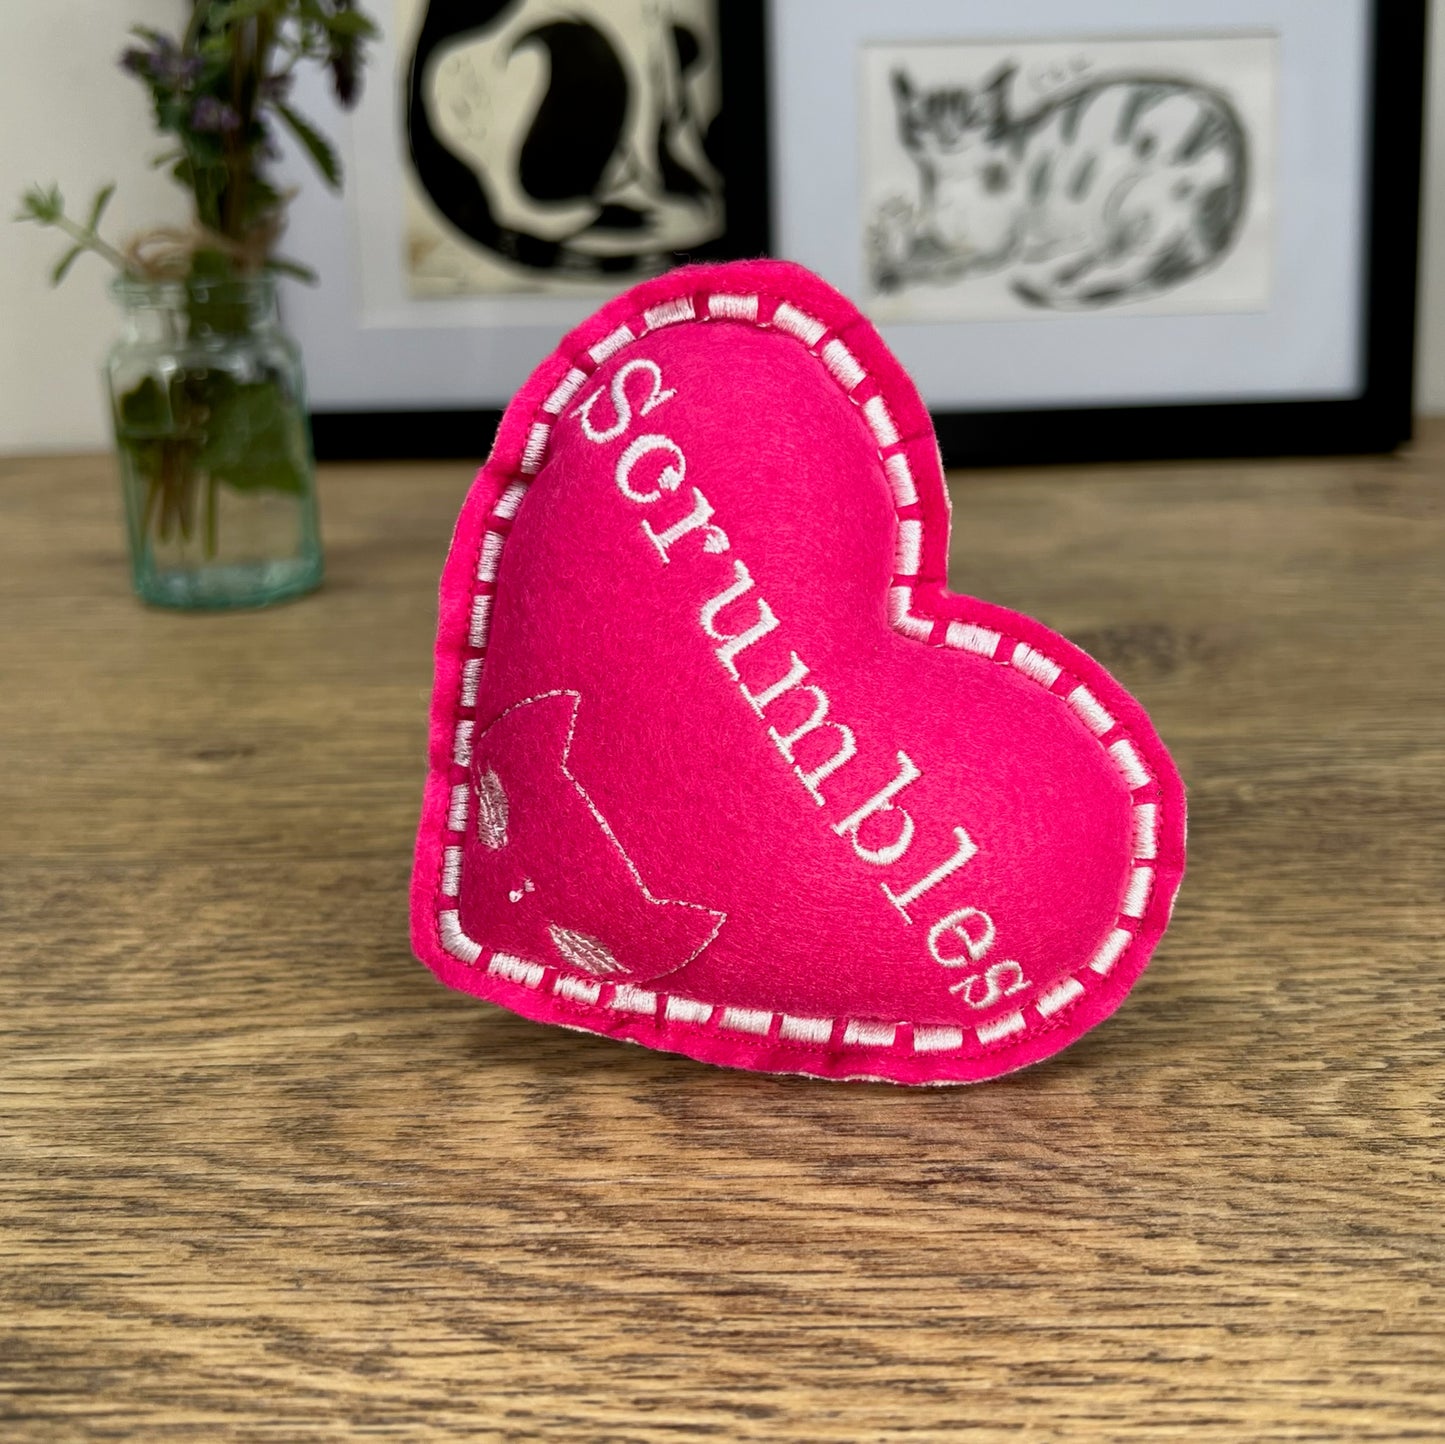 Freak Meowt Luxury Catnip Cat Toys, Gifts for Cats Personalised Heart